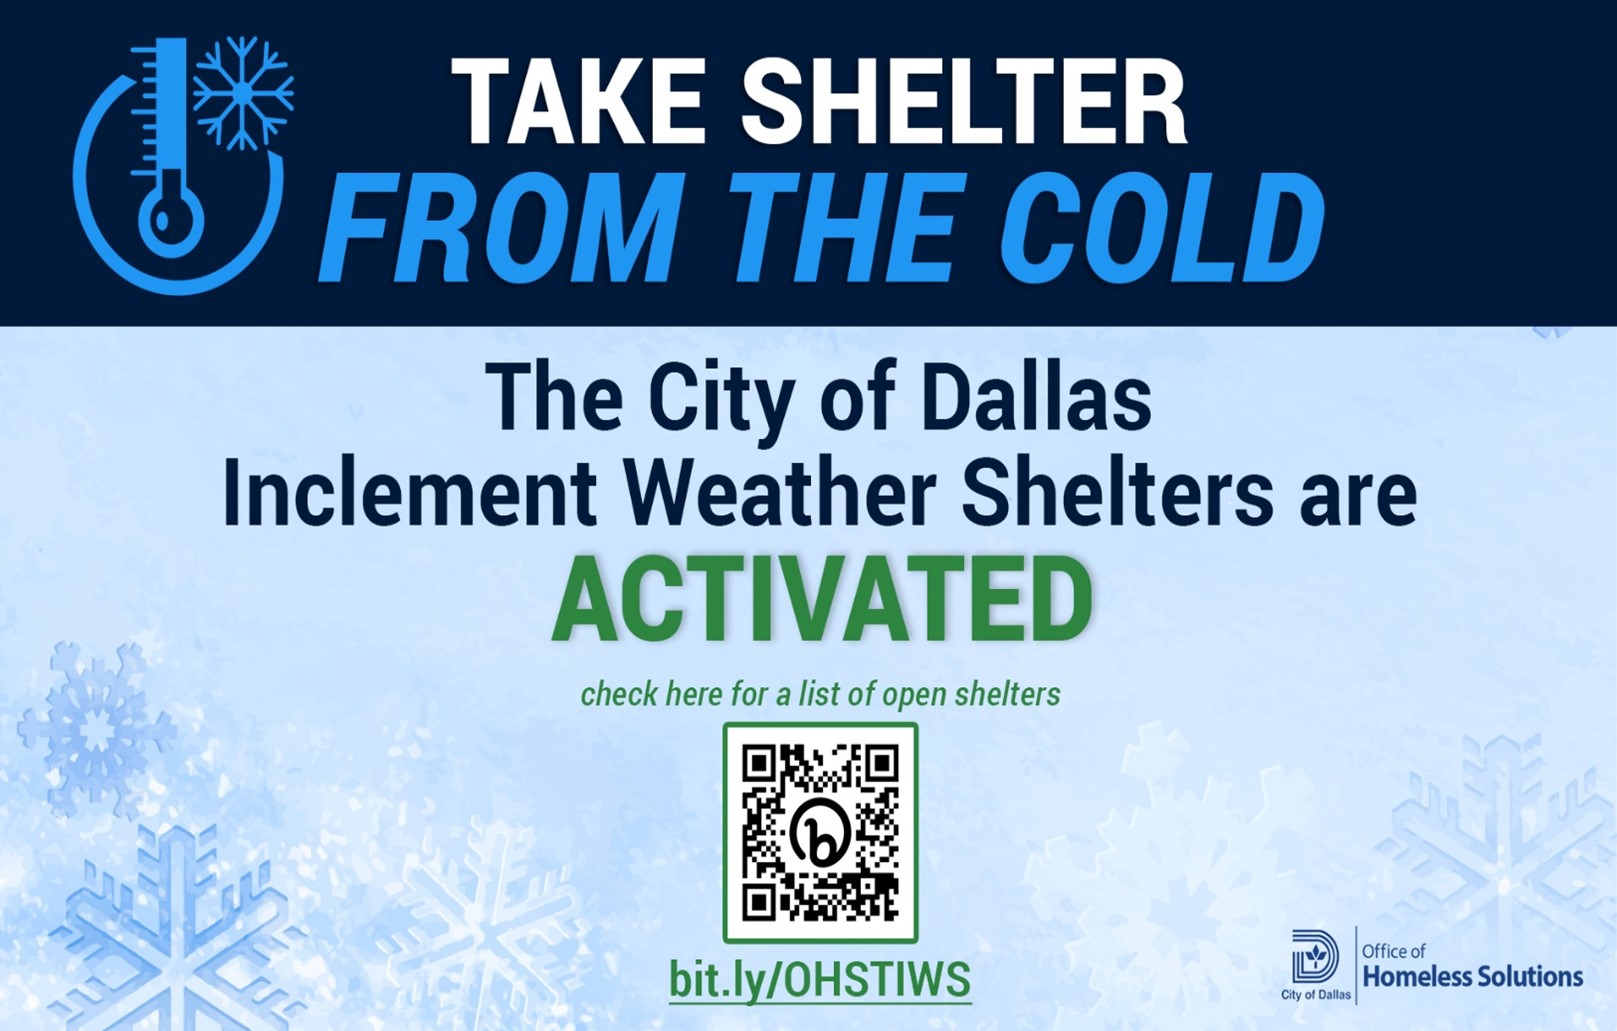 City of Dallas Inclement Weather Flyer.jpg